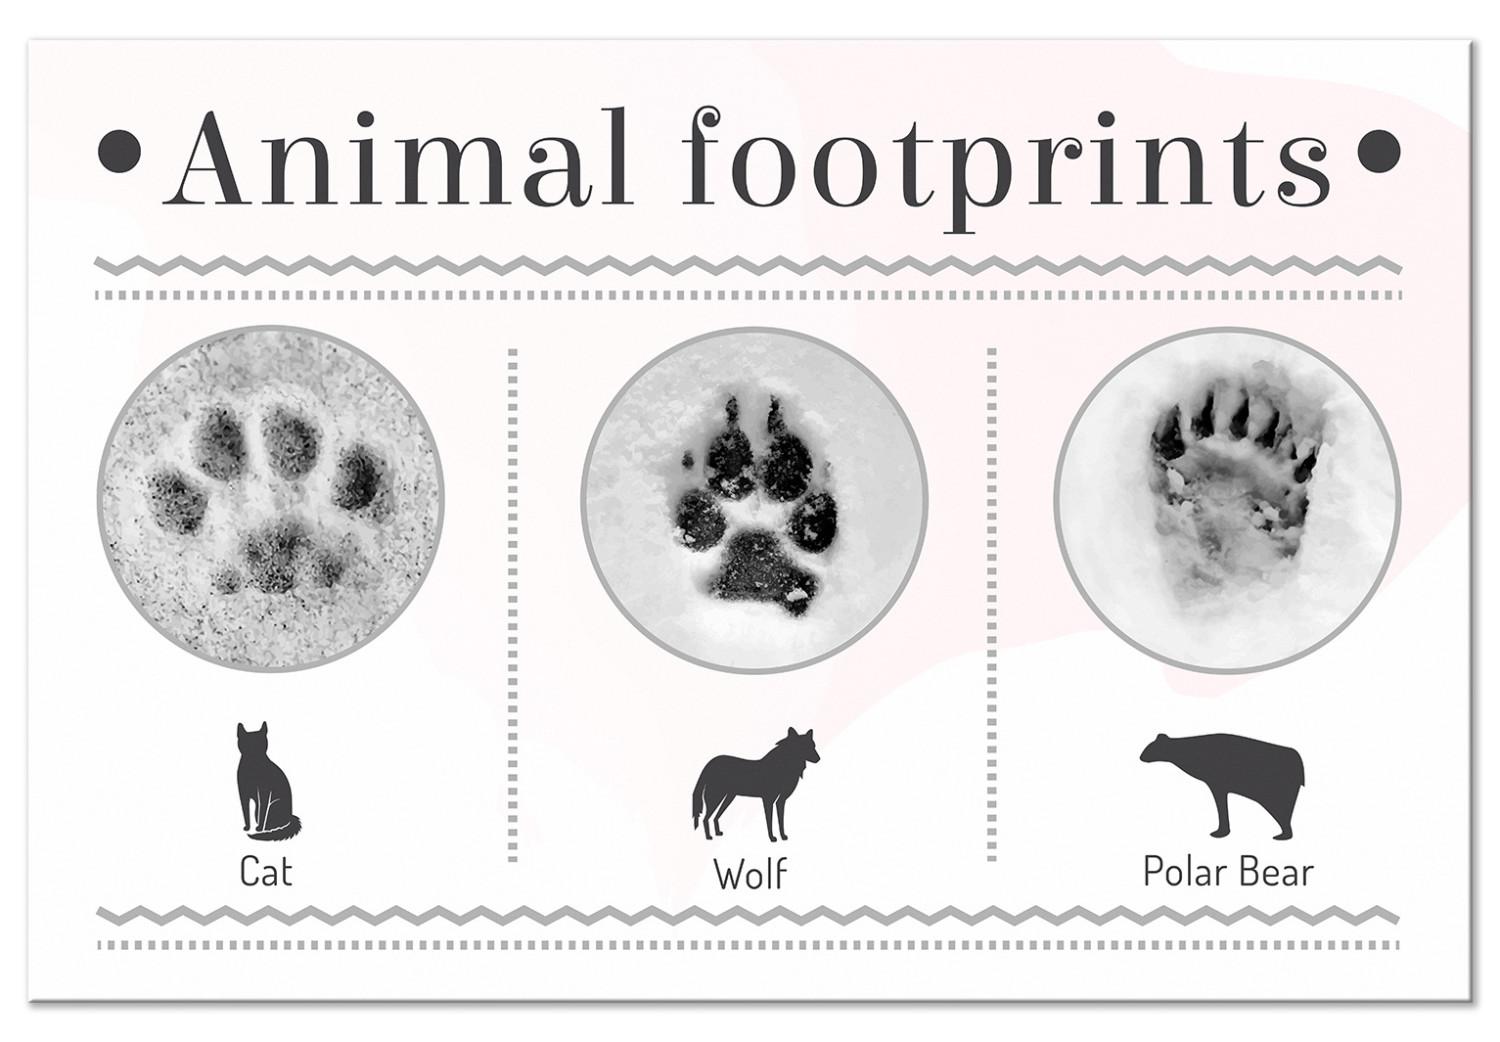 Canvas Winter footprints - infographic with animals and English inscriptions